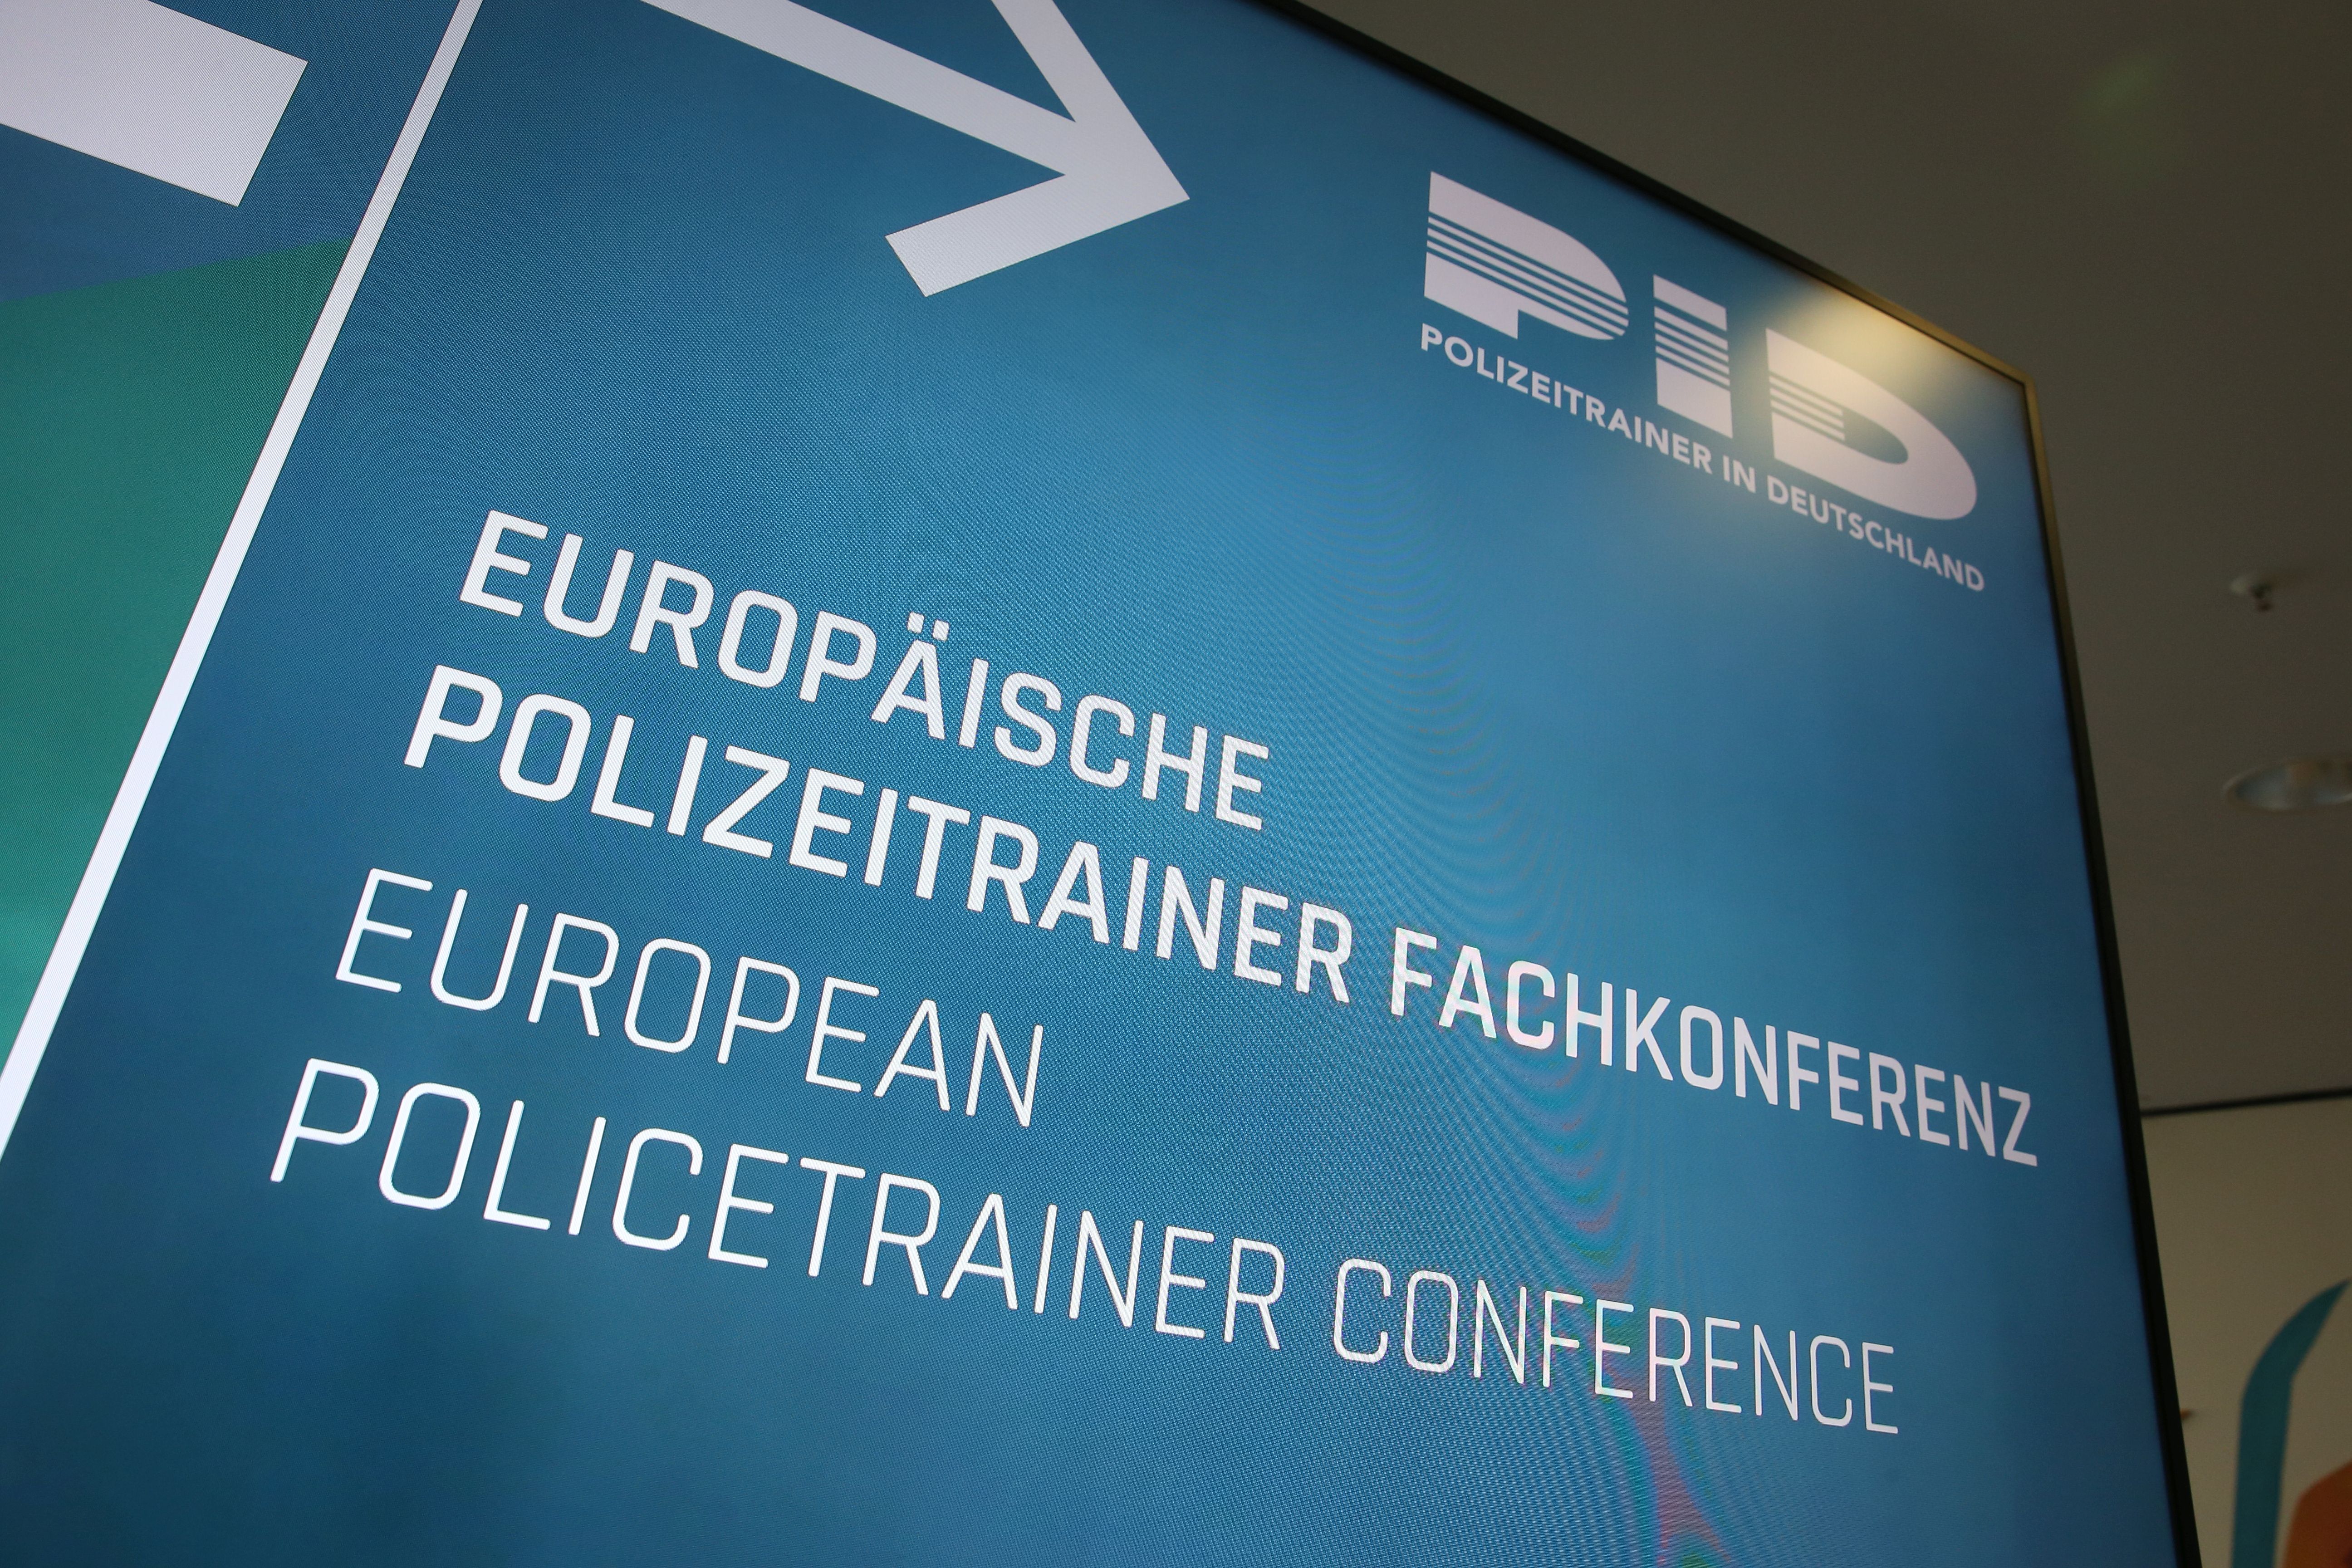 European Policetrainer Conference